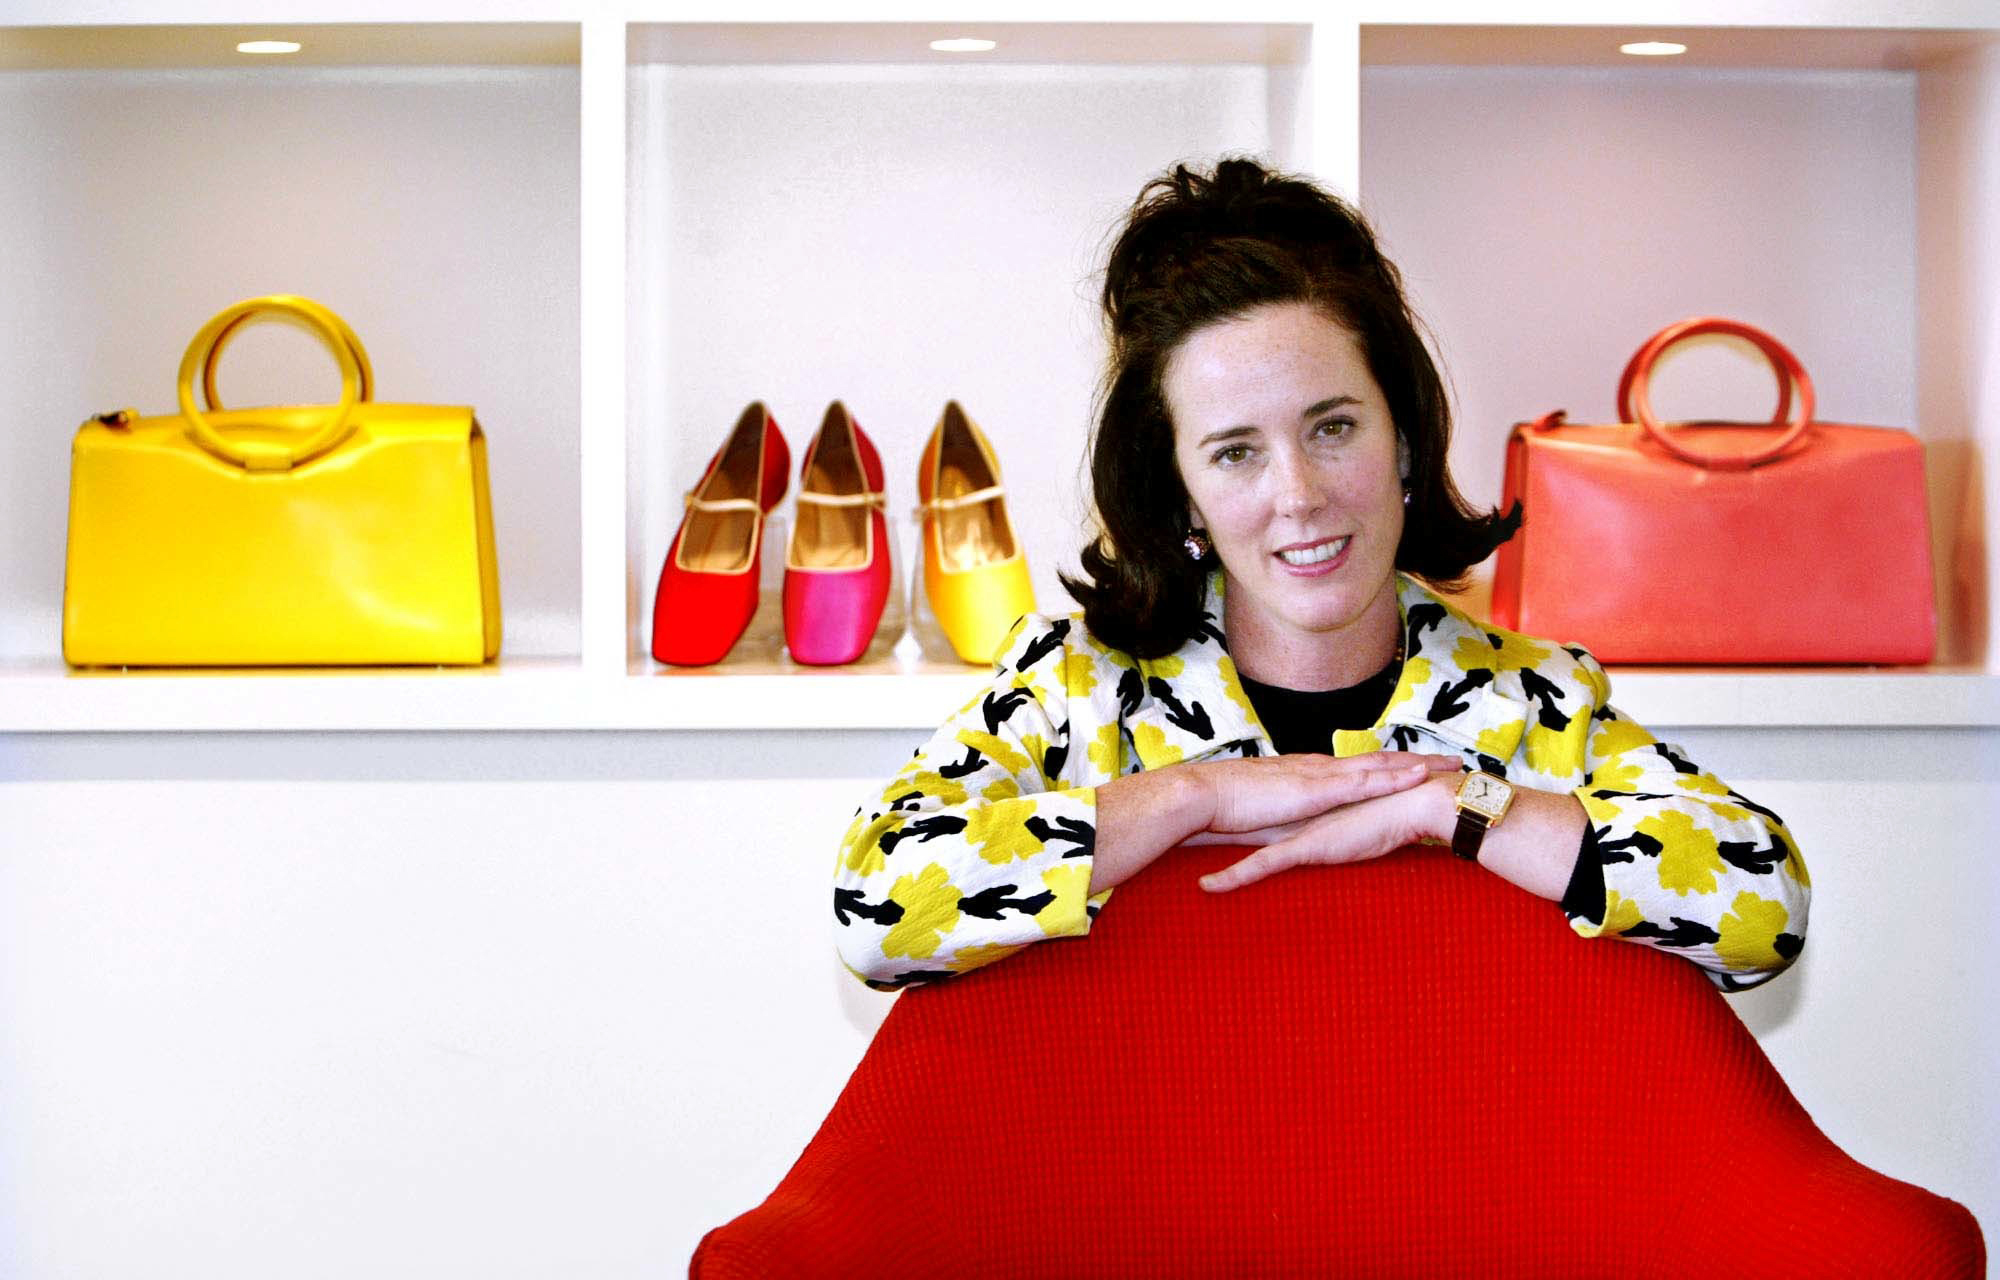 the wind is strong Emulation Frightening The legacy of Kate Spade - CNN Style